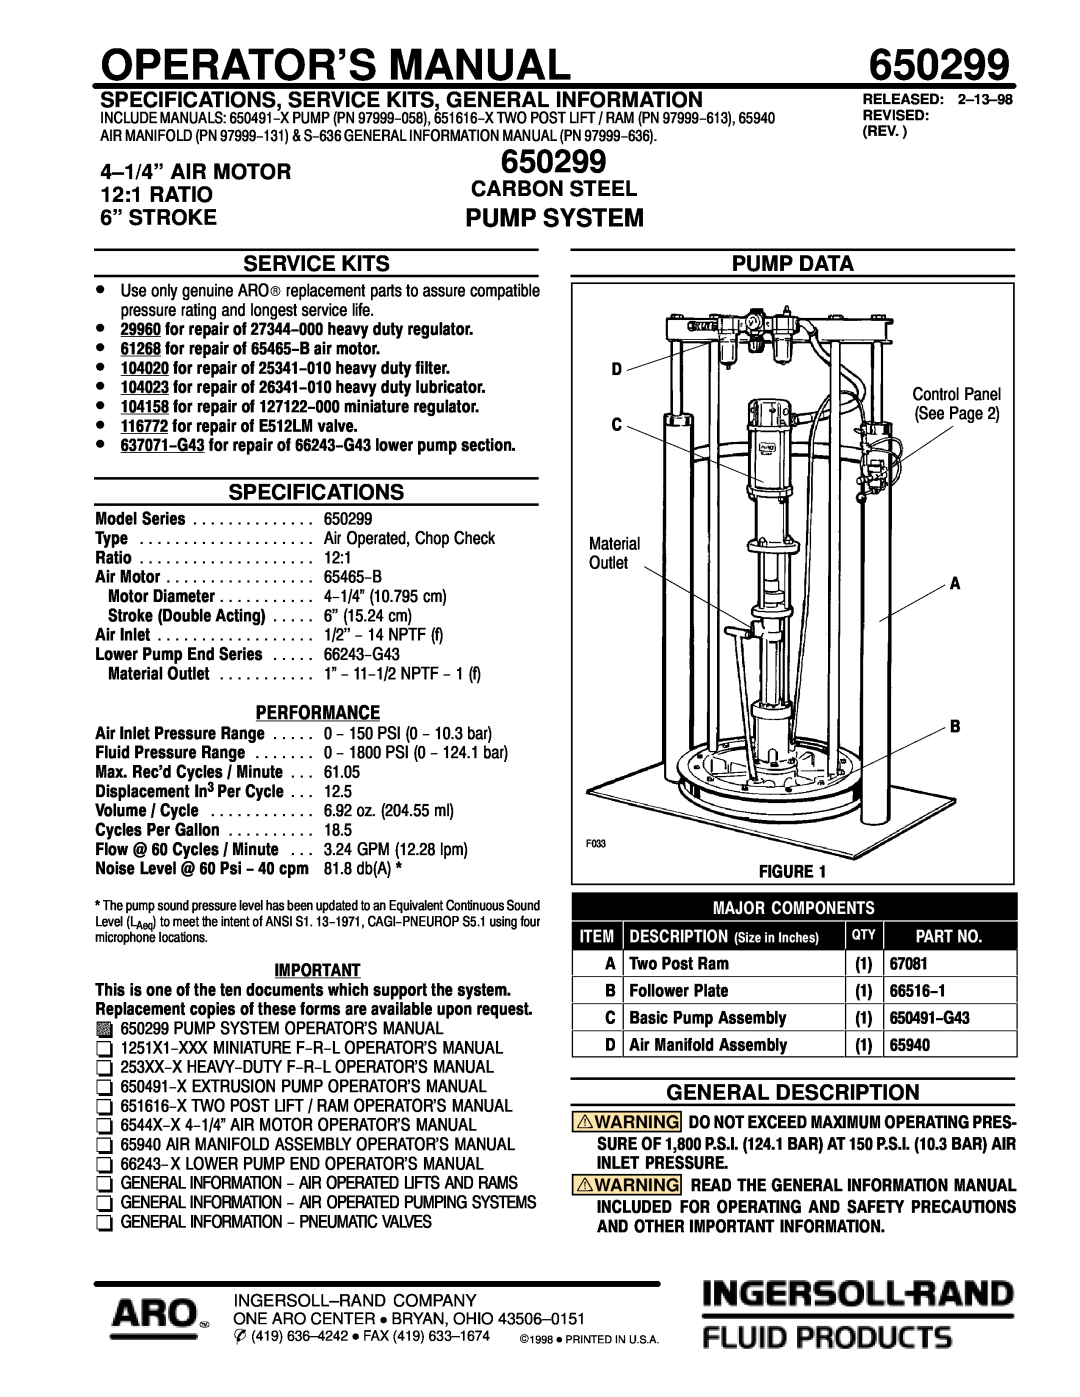 Ingersoll-Rand 650299 specifications Specifications, Service Kits, General Information, 4-1/4” AIR MOTOR, Ratio, 6” STROKE 